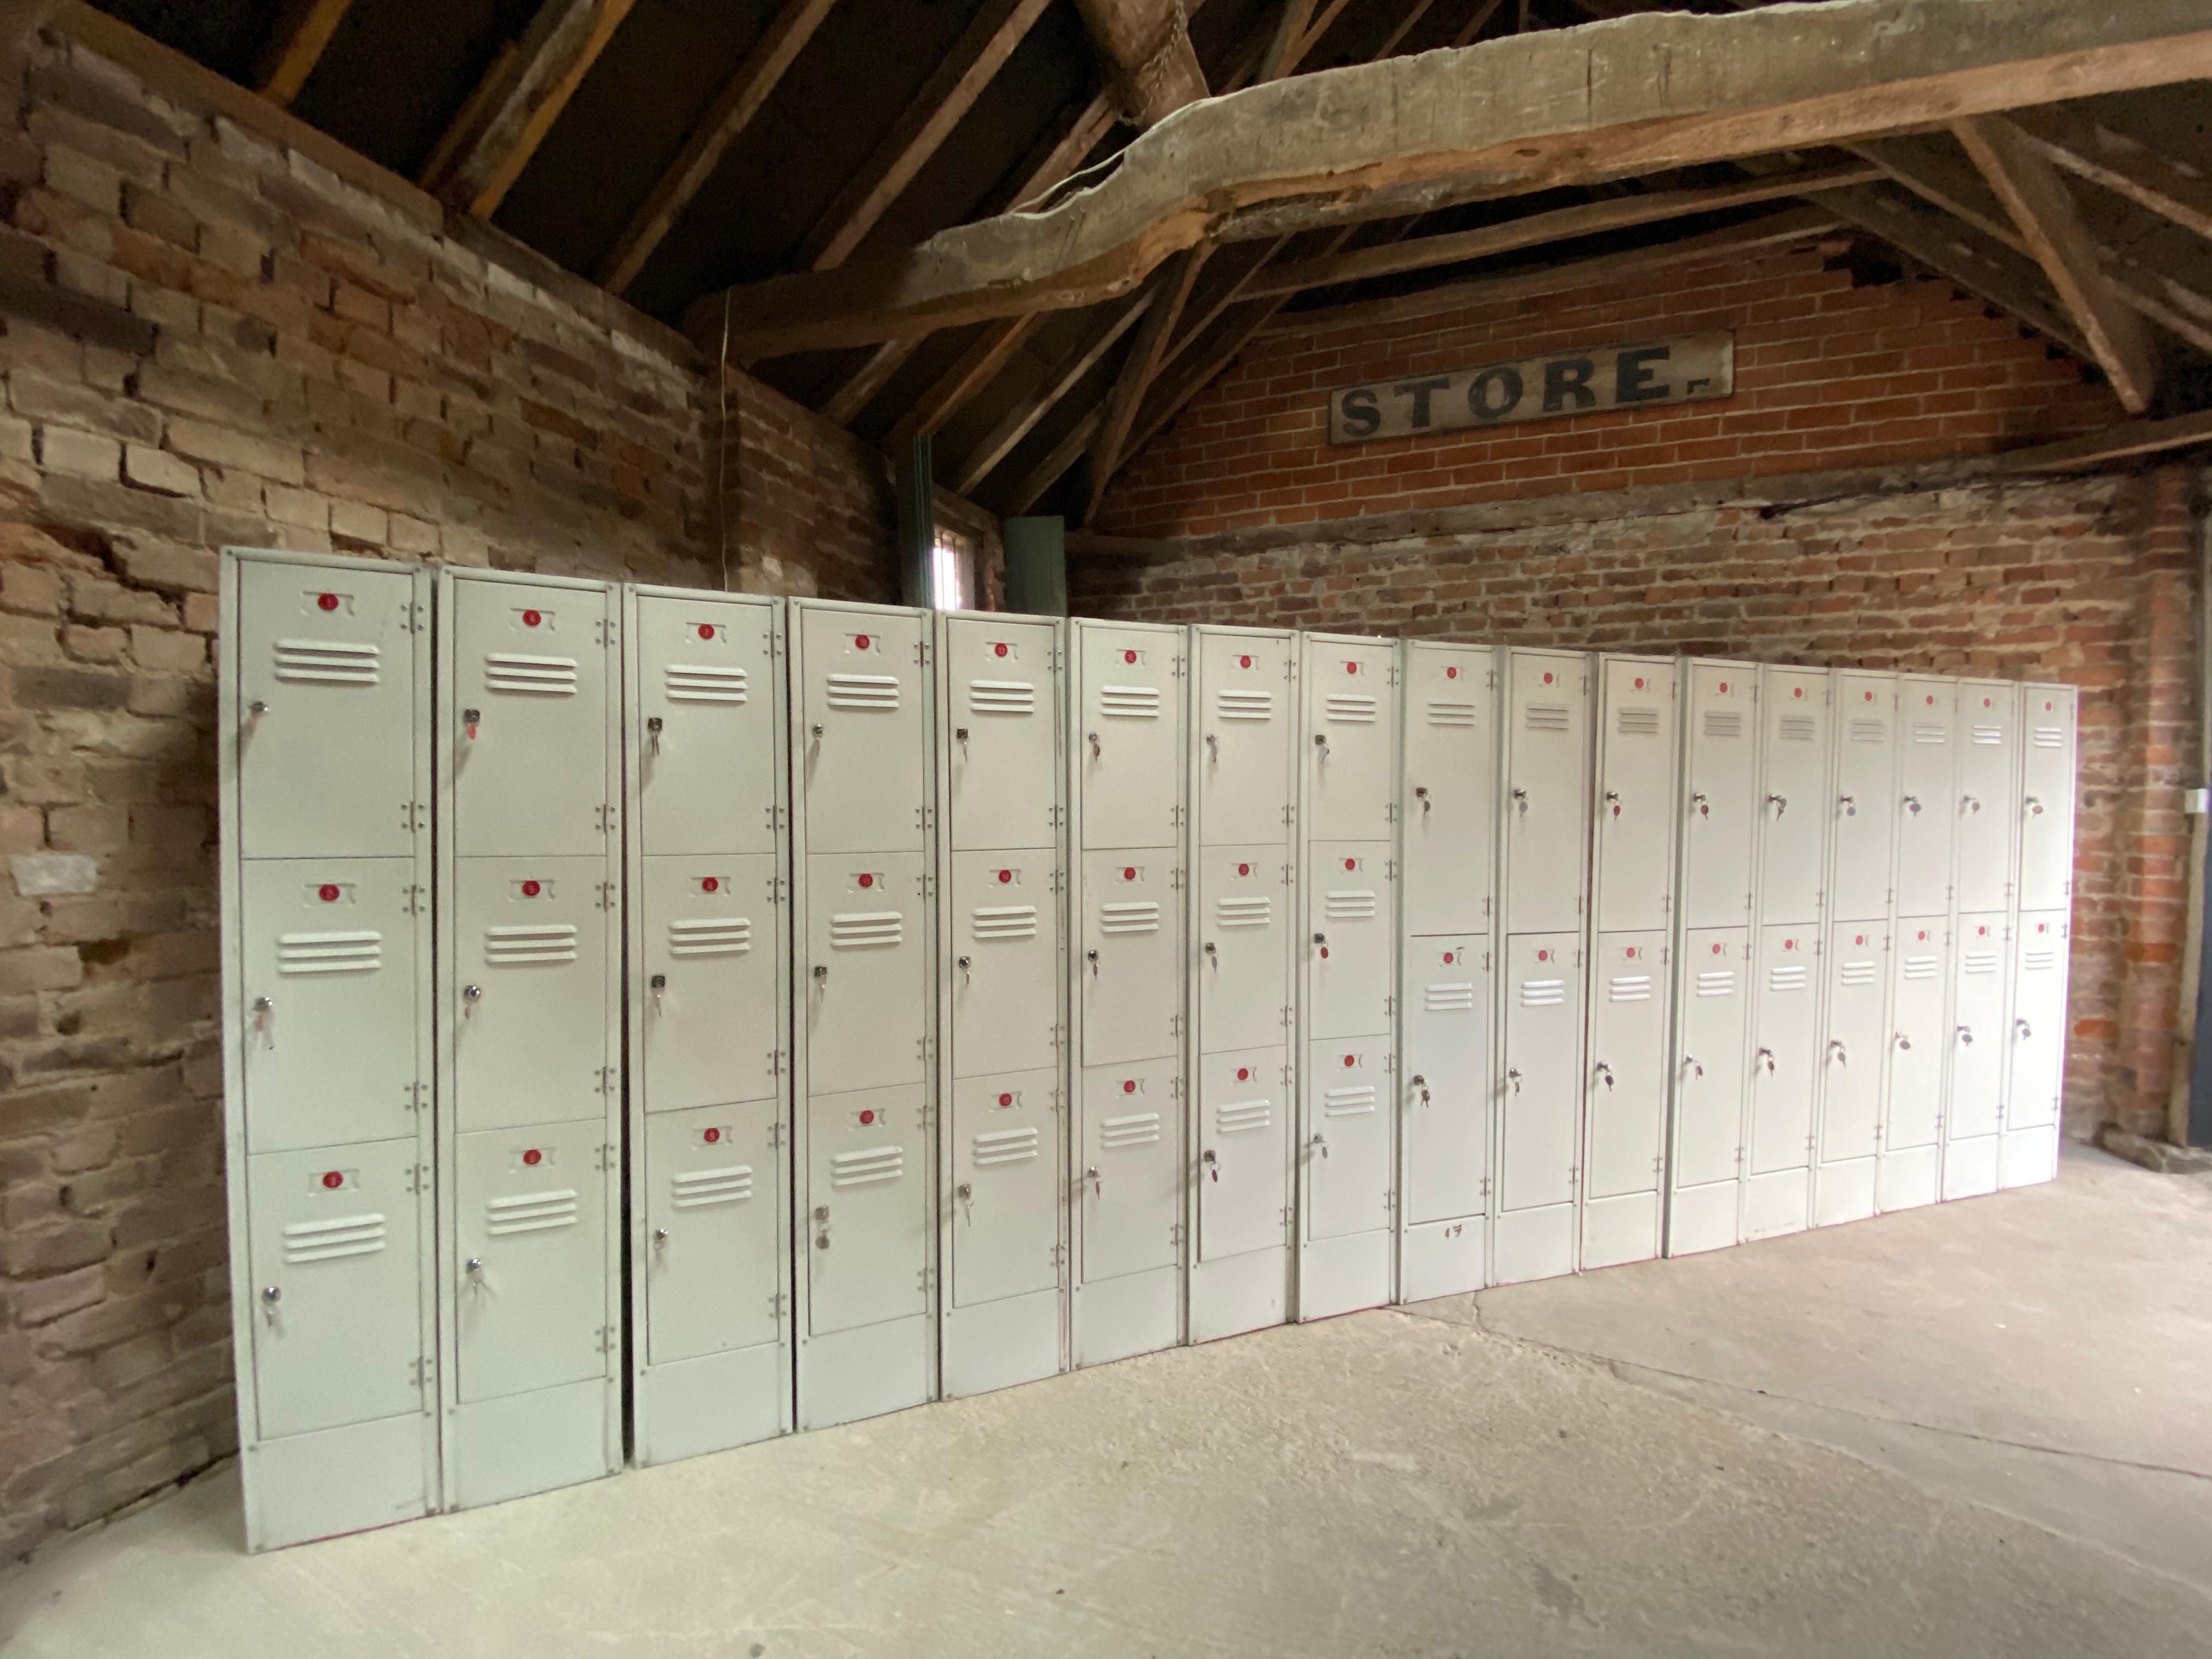 Industrial steel lockers loft style set of seventeen with forty two compartments

Industrial steel lockers comprising of 17 individual lockers with a total of 42 cabinets, each locker with lock and key, can be used individually or as a run of 17,